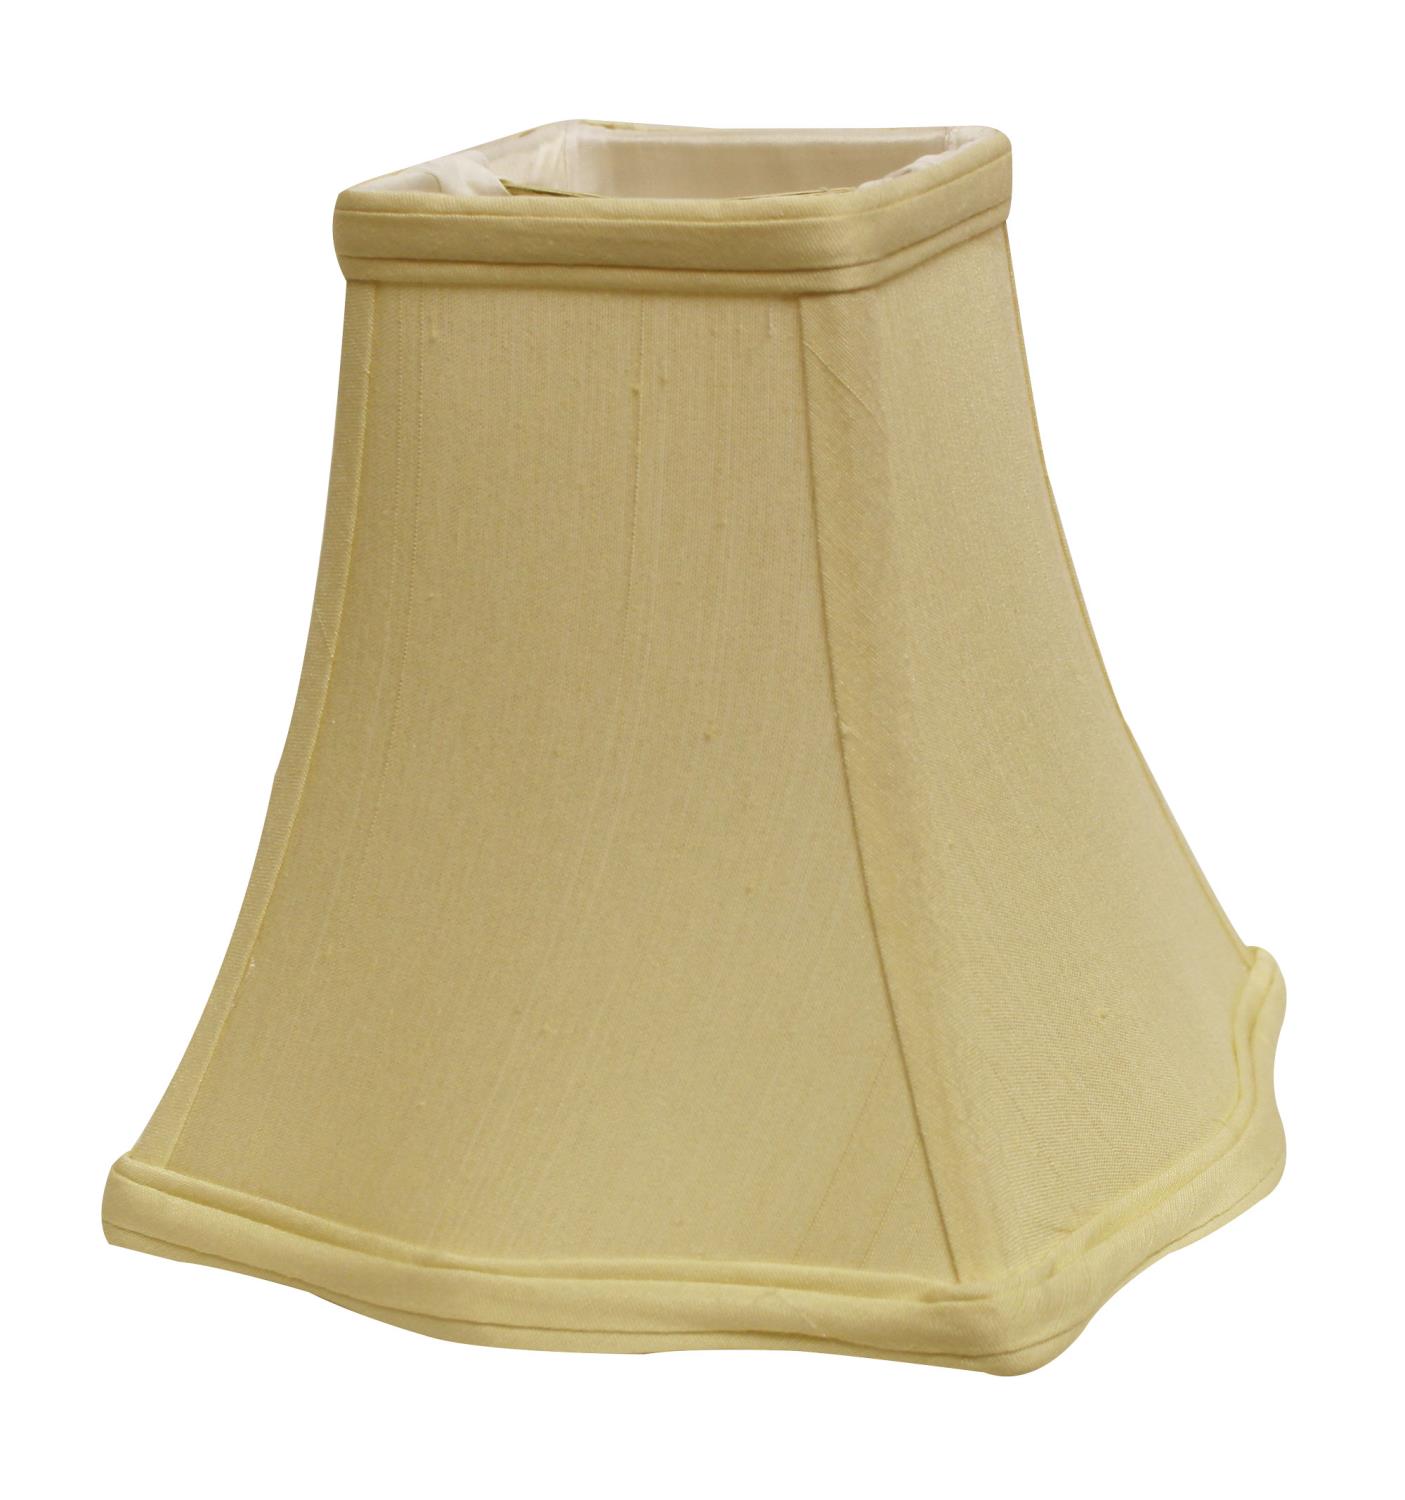 Lake Shore LLC Martinshade Limited Slant Fancy Square Softback Lampshade With Washer Fitter, Antique White